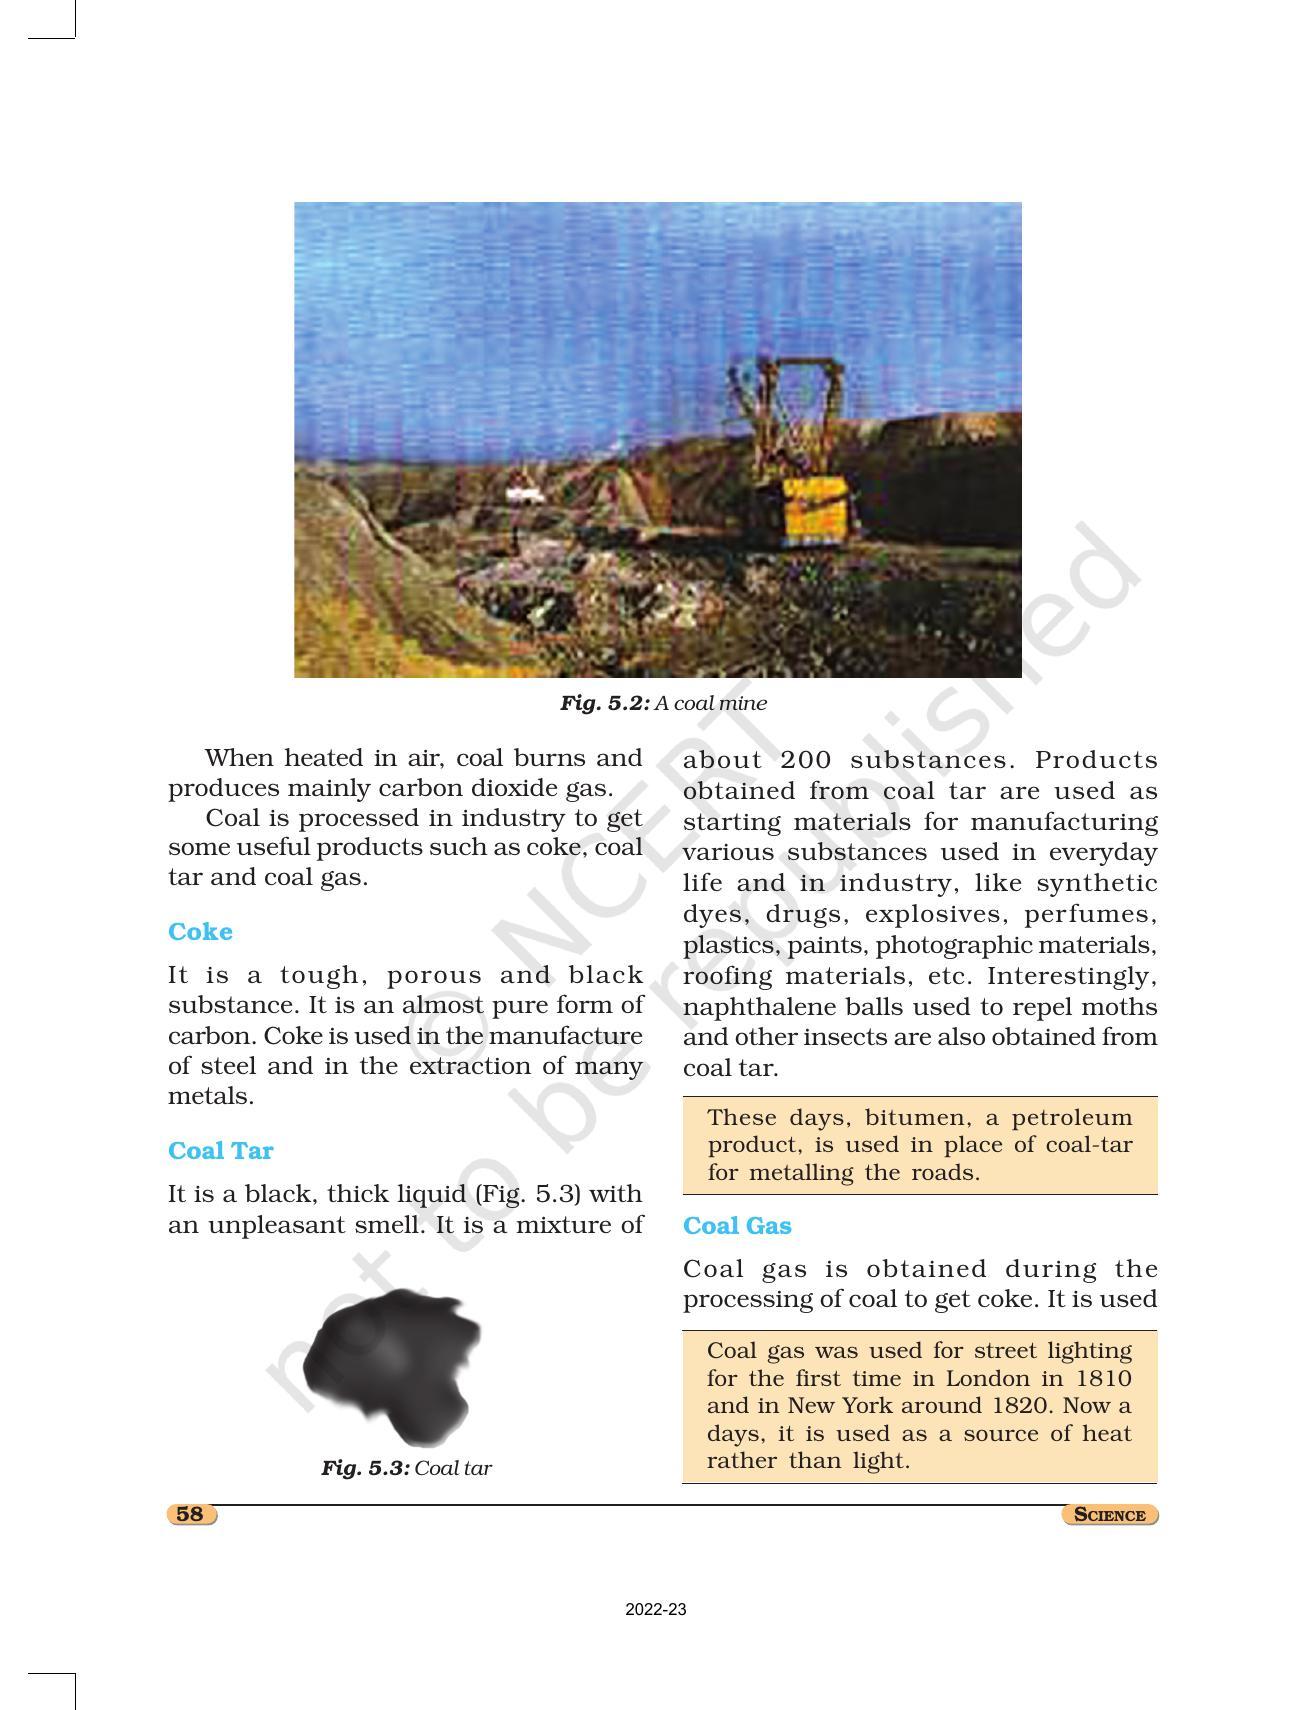 NCERT Book for Class 8 Science Chapter 5 Coal and Petroleum - Page 3